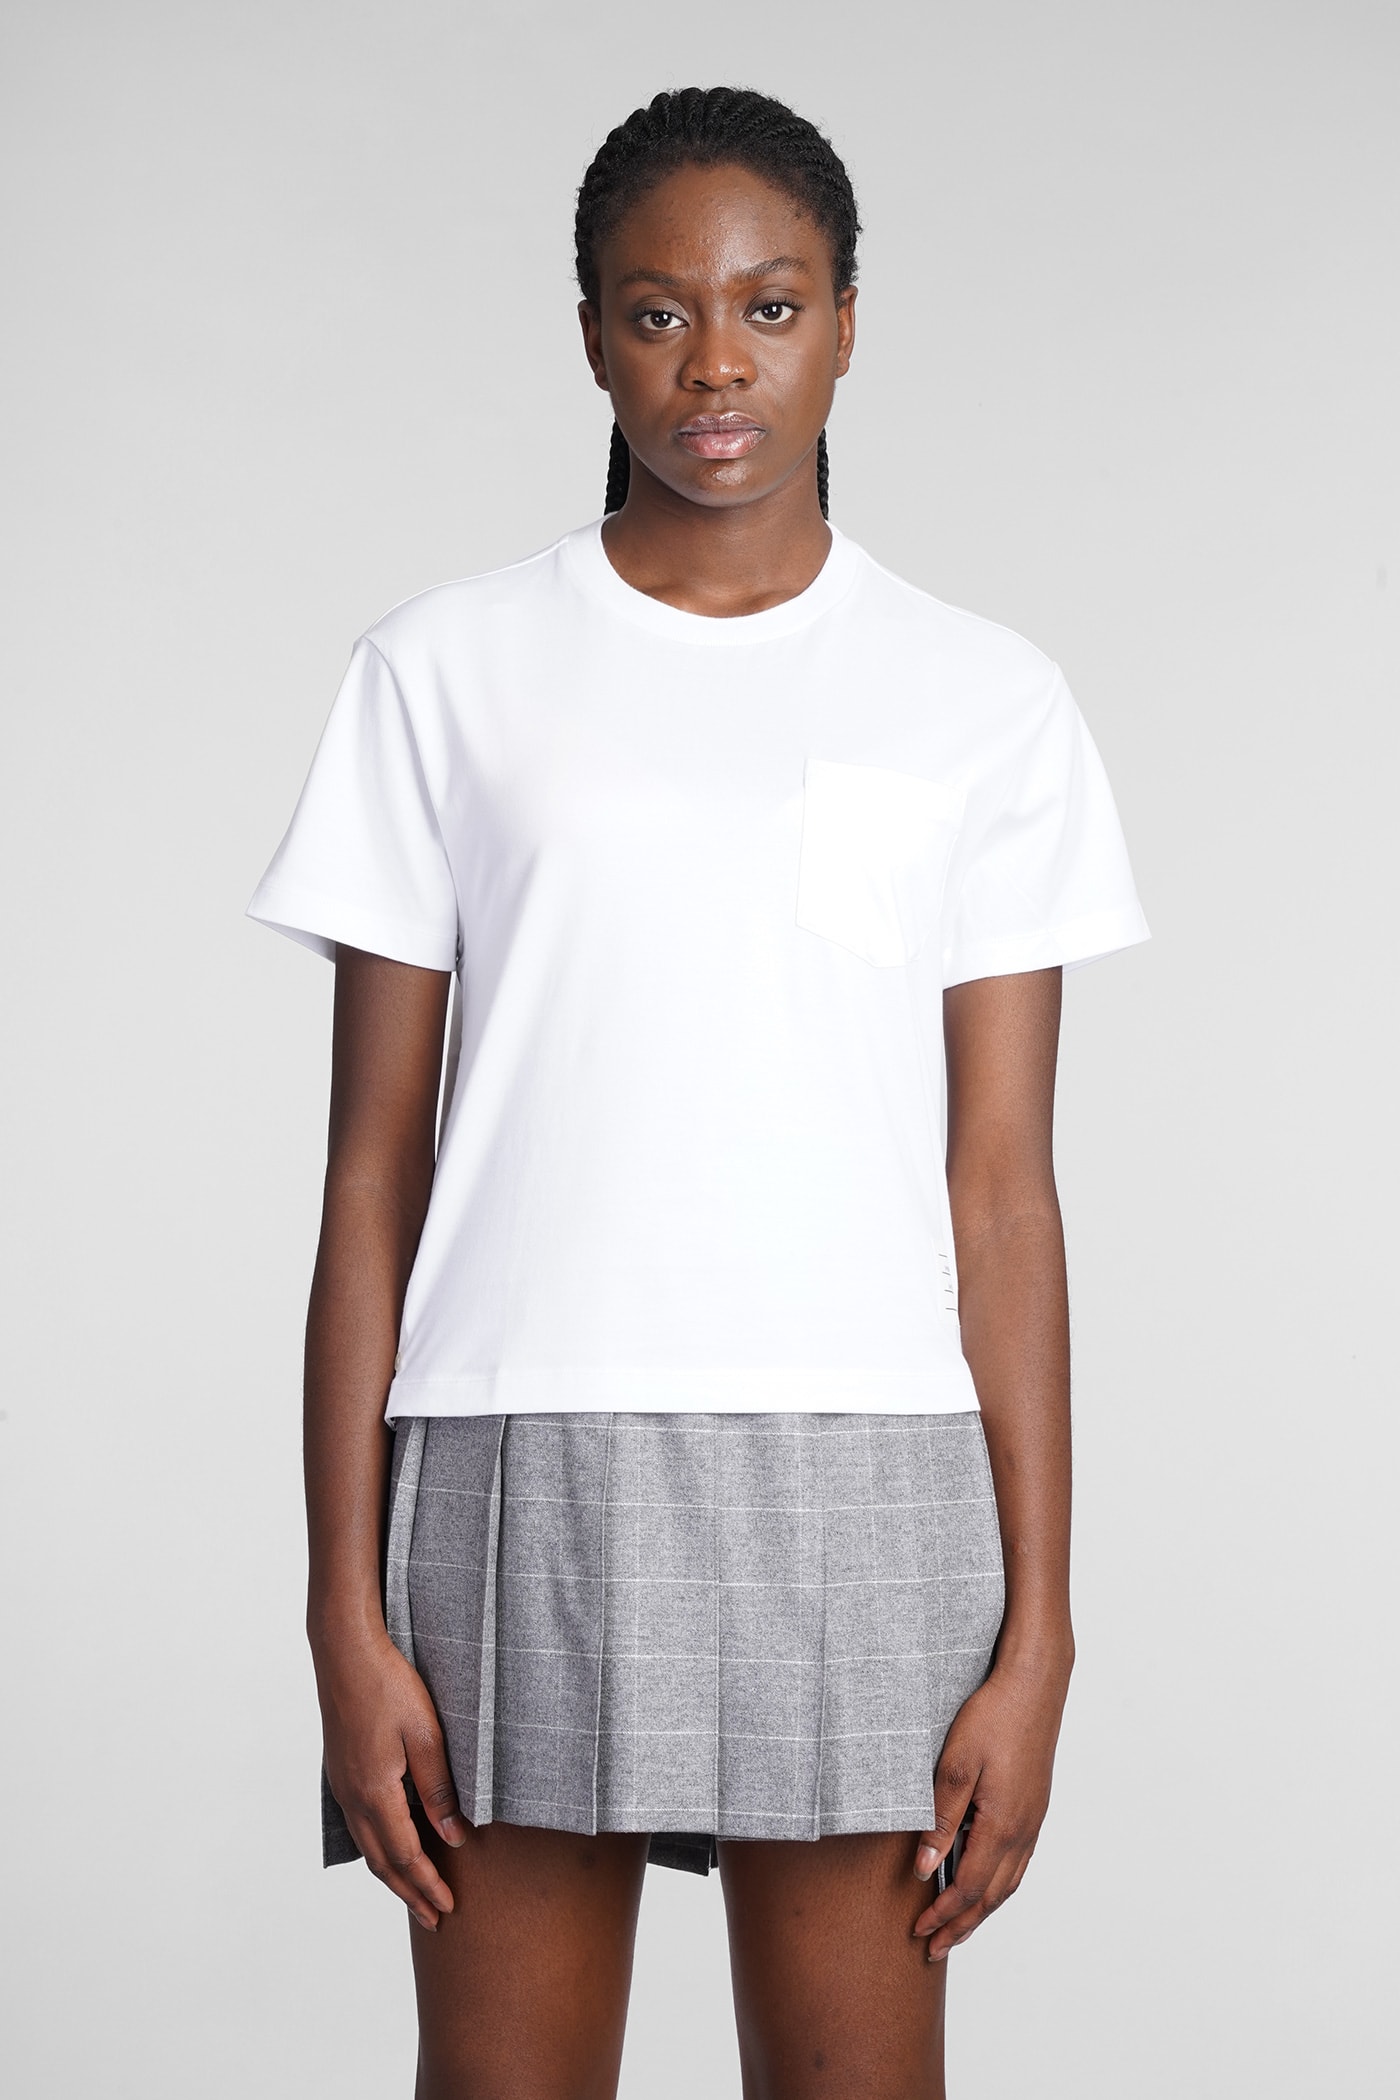 THOM BROWNE T-SHIRT IN WHITE COTTON